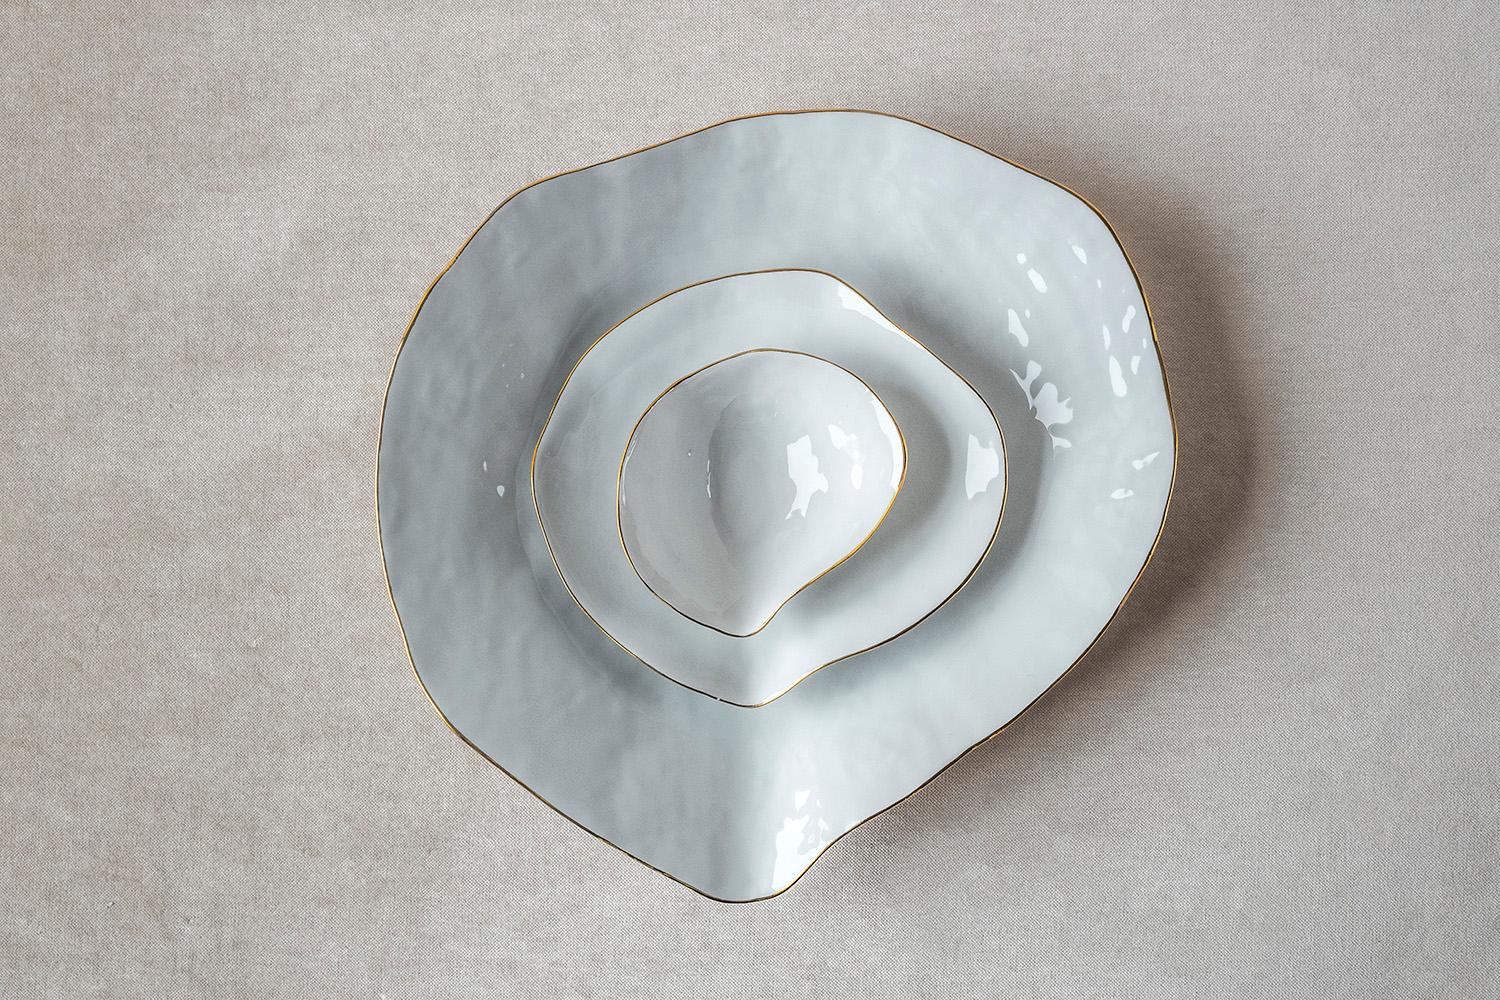 • Sensual dinner set
• measures 30cm x 29cm x 5,5cm and 18cm x 17cm x 4cm and 10,5cm x 11cm x 4,7cm 
• perfect to present 1 fabulous dish or a few different courses
• glazed white with a very luxurious 24-carat golden rim
• unglazed textured